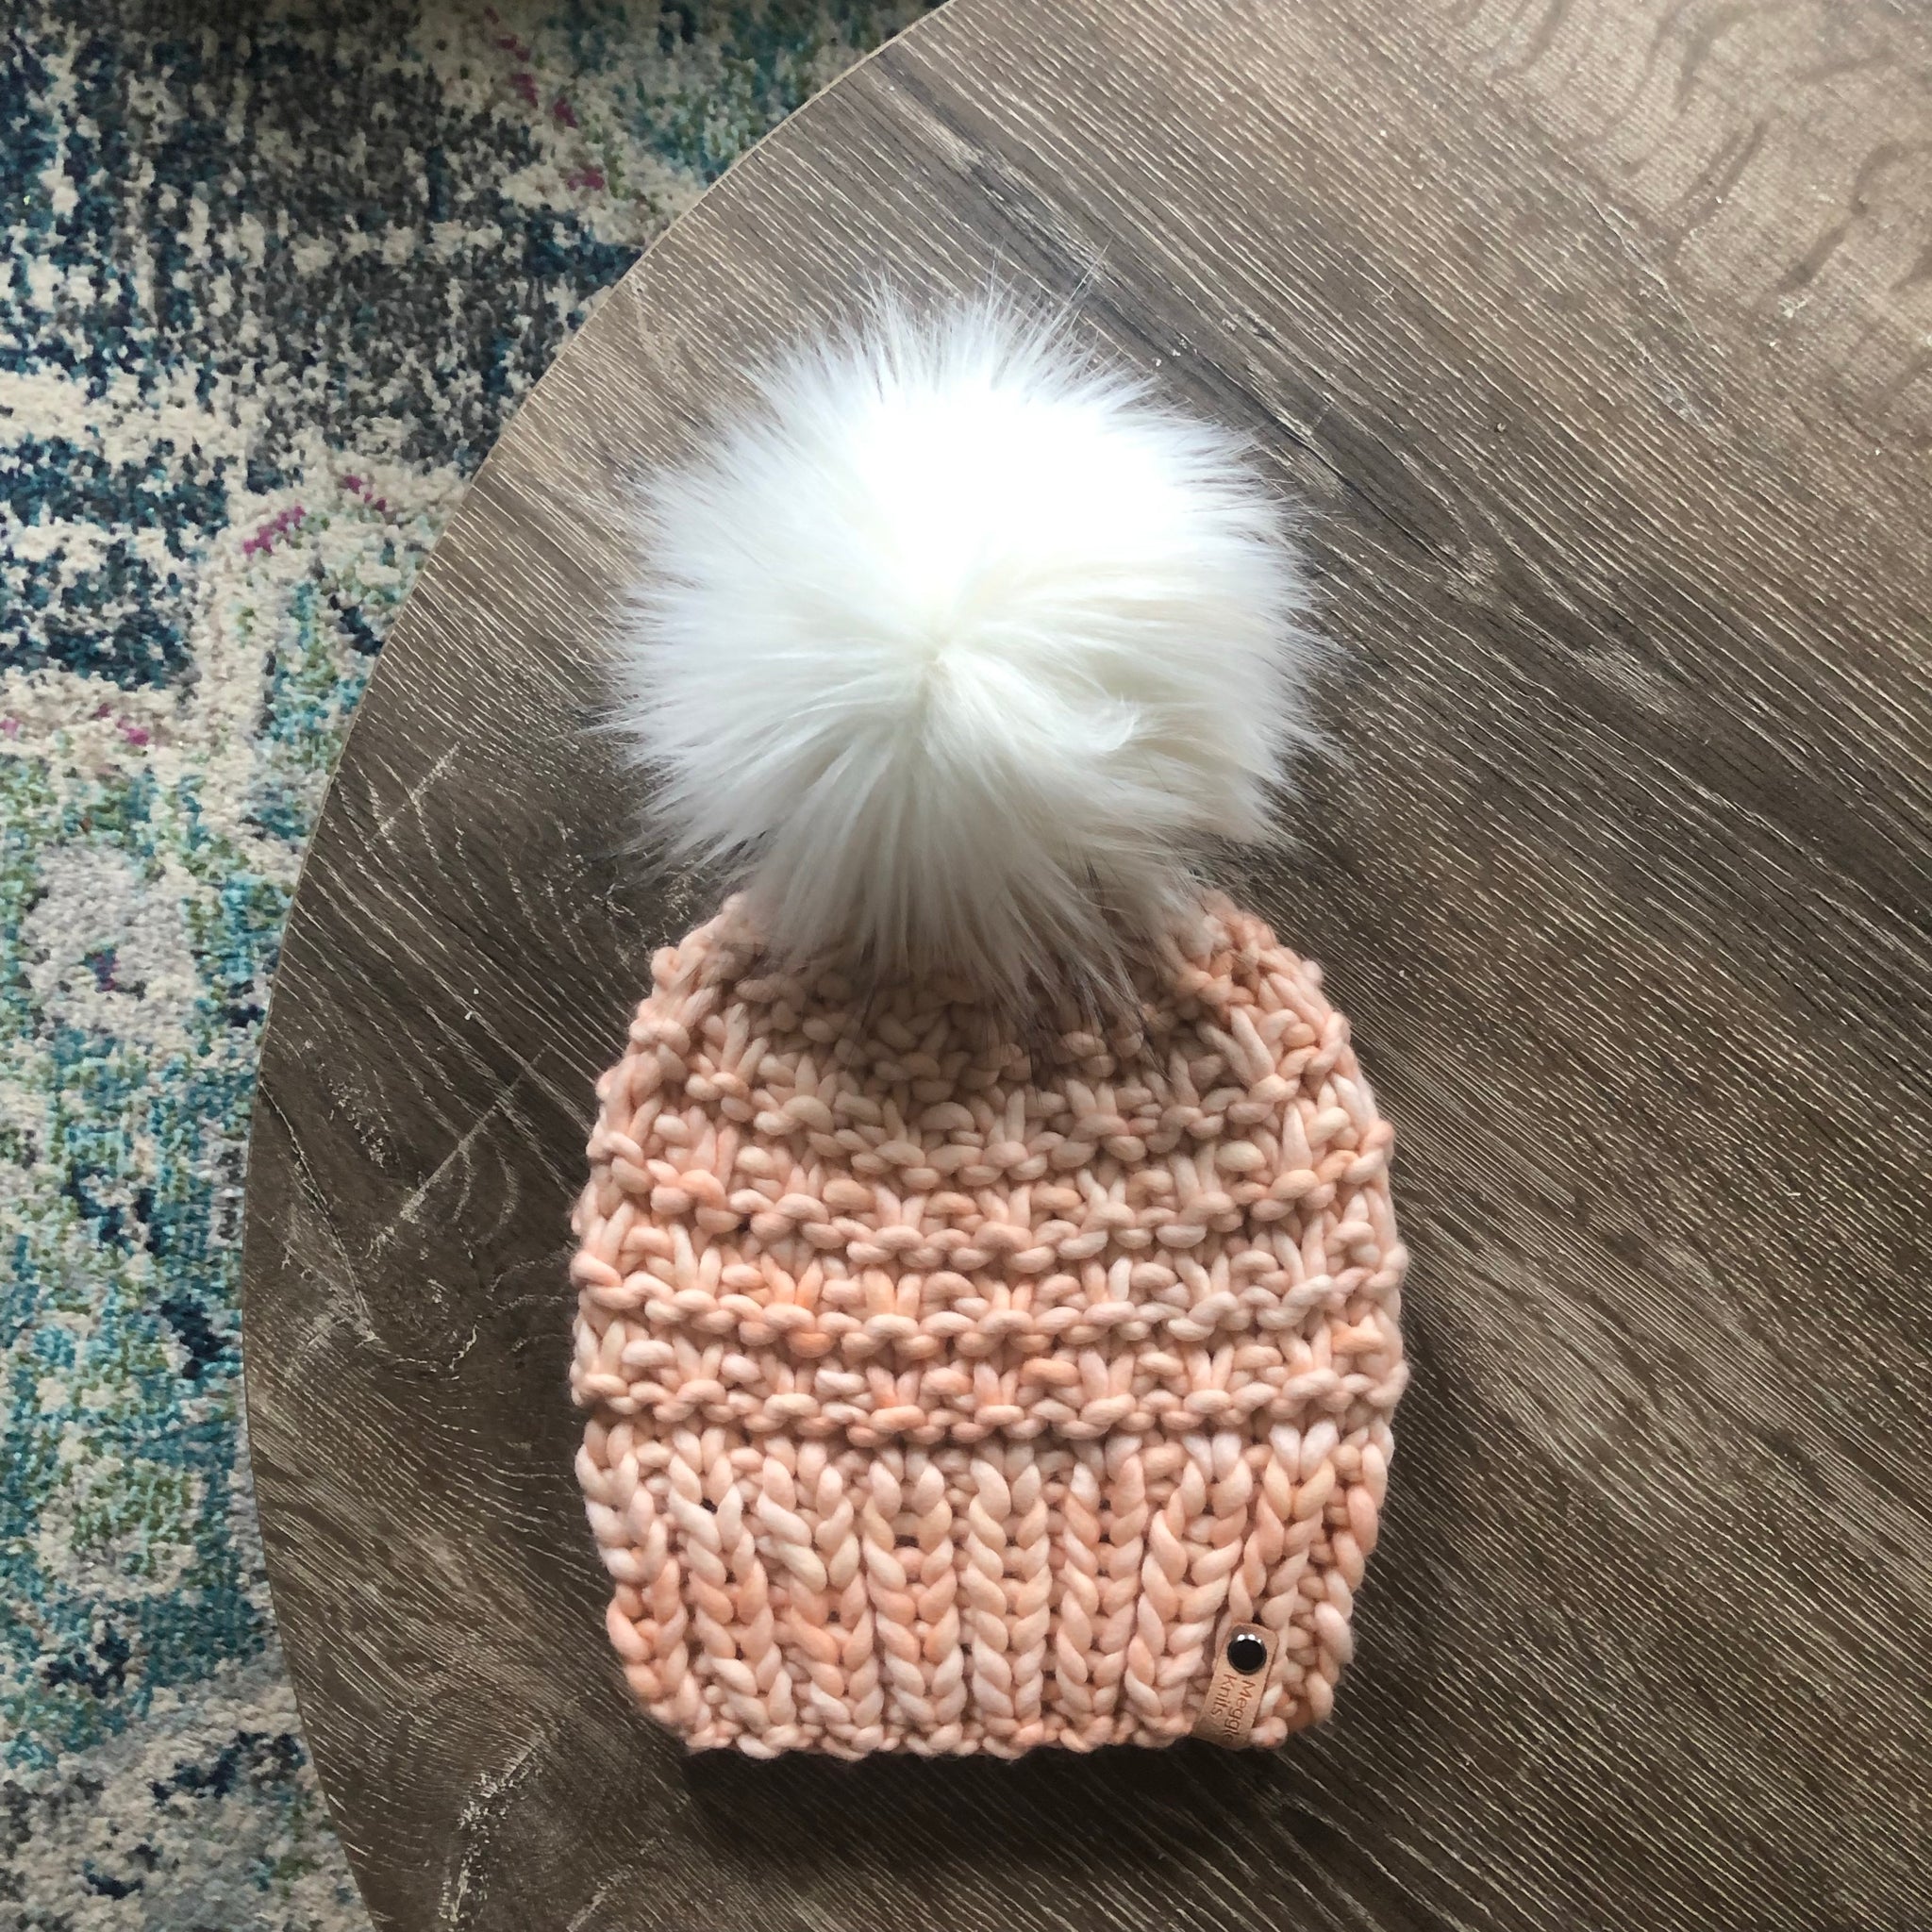 How to Make a Faux Fur Pom-Pom for Knit & Crochet Hats